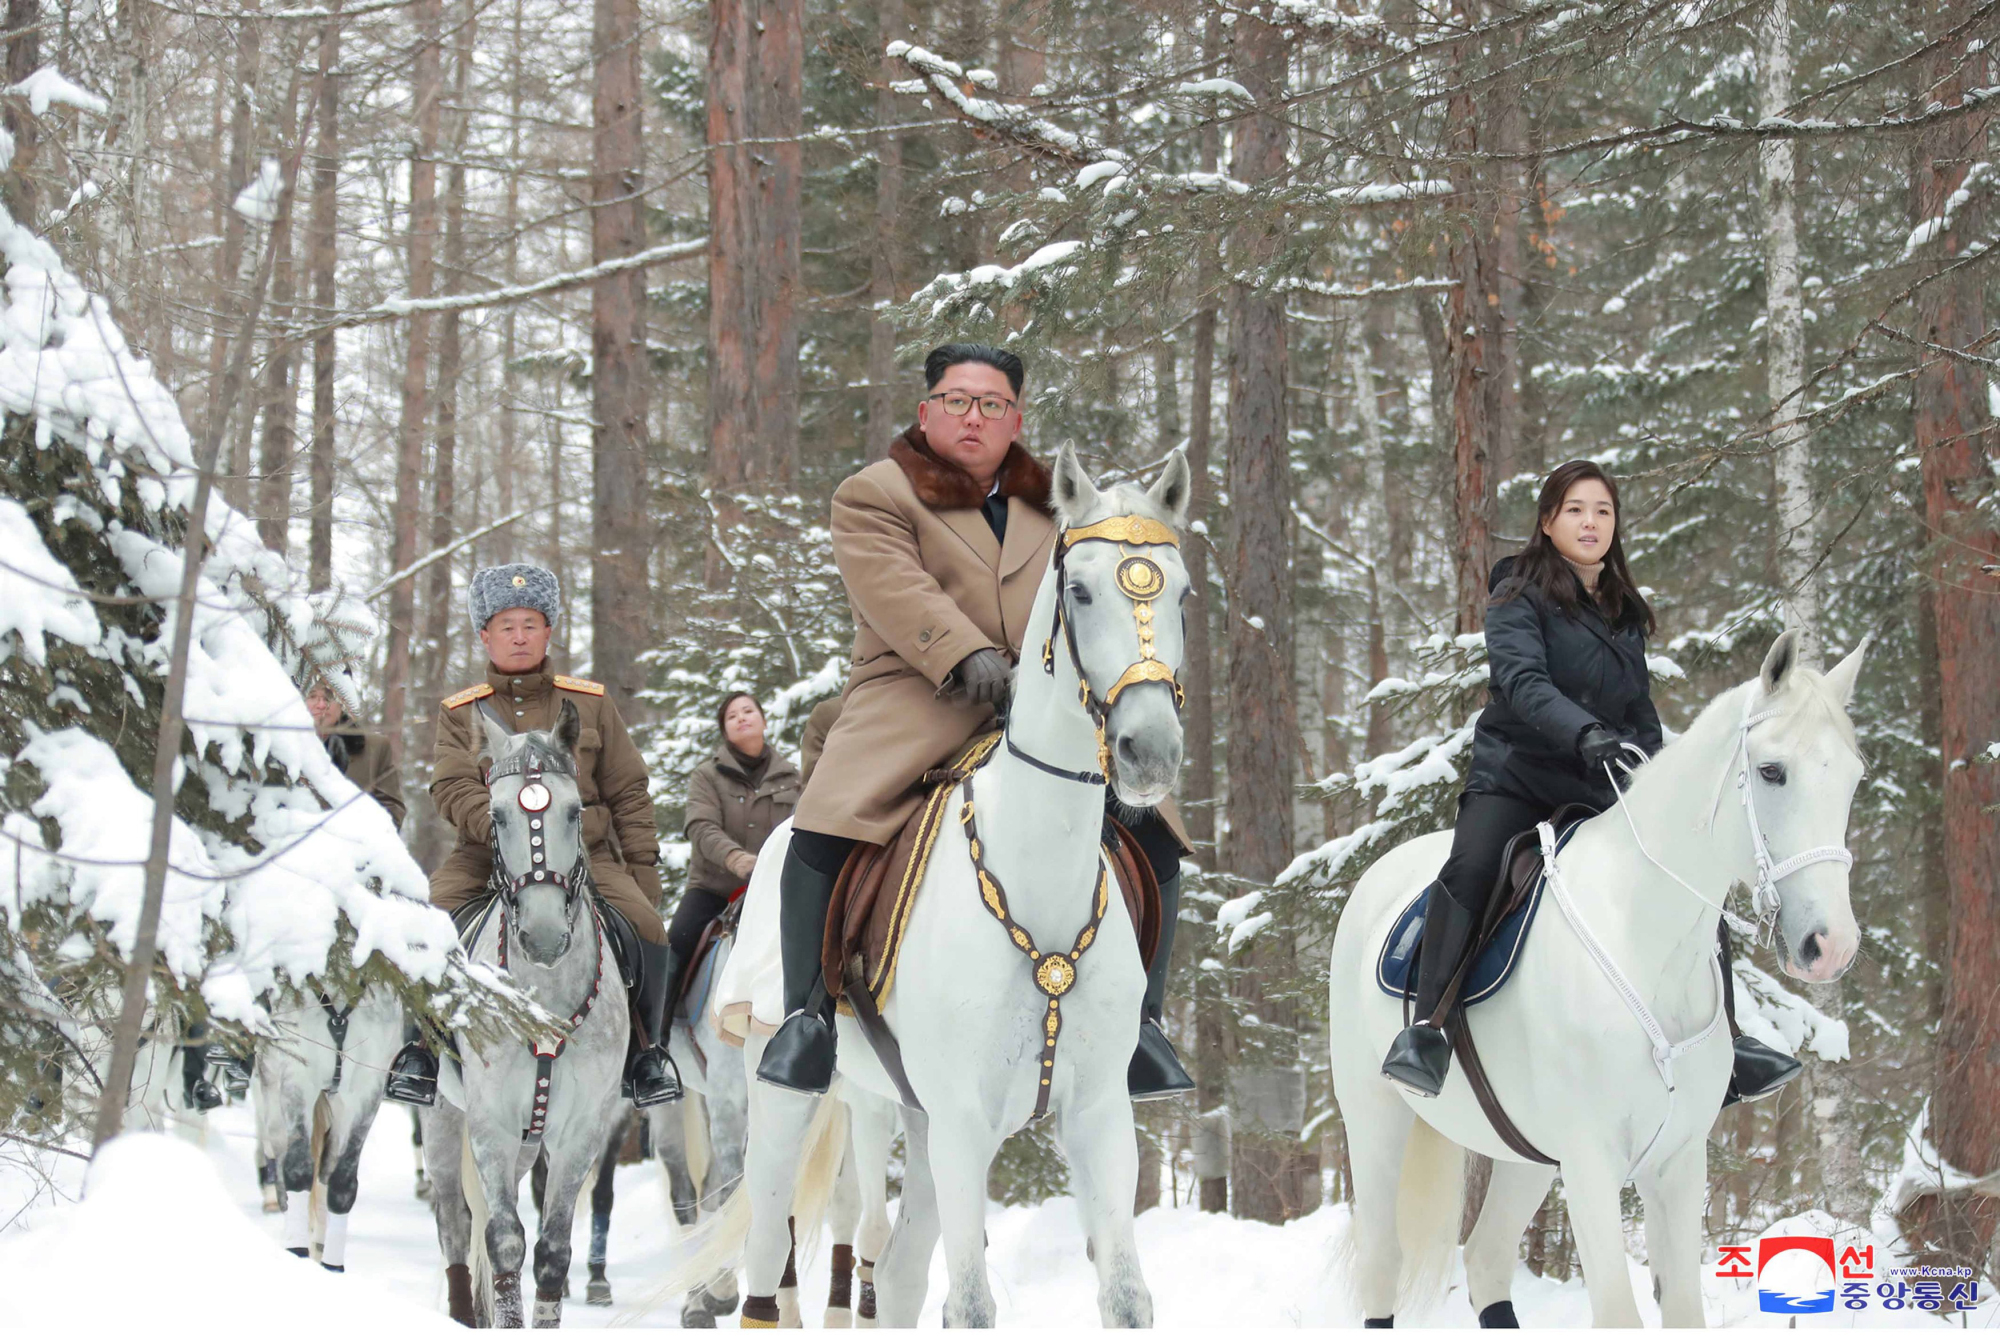 North Korean leader Kim Jong Un rides a white steed as he visits battle sites in the area of Mount Paektu in this undated picture released Wednesday. | KCNA / VIA REUTERS